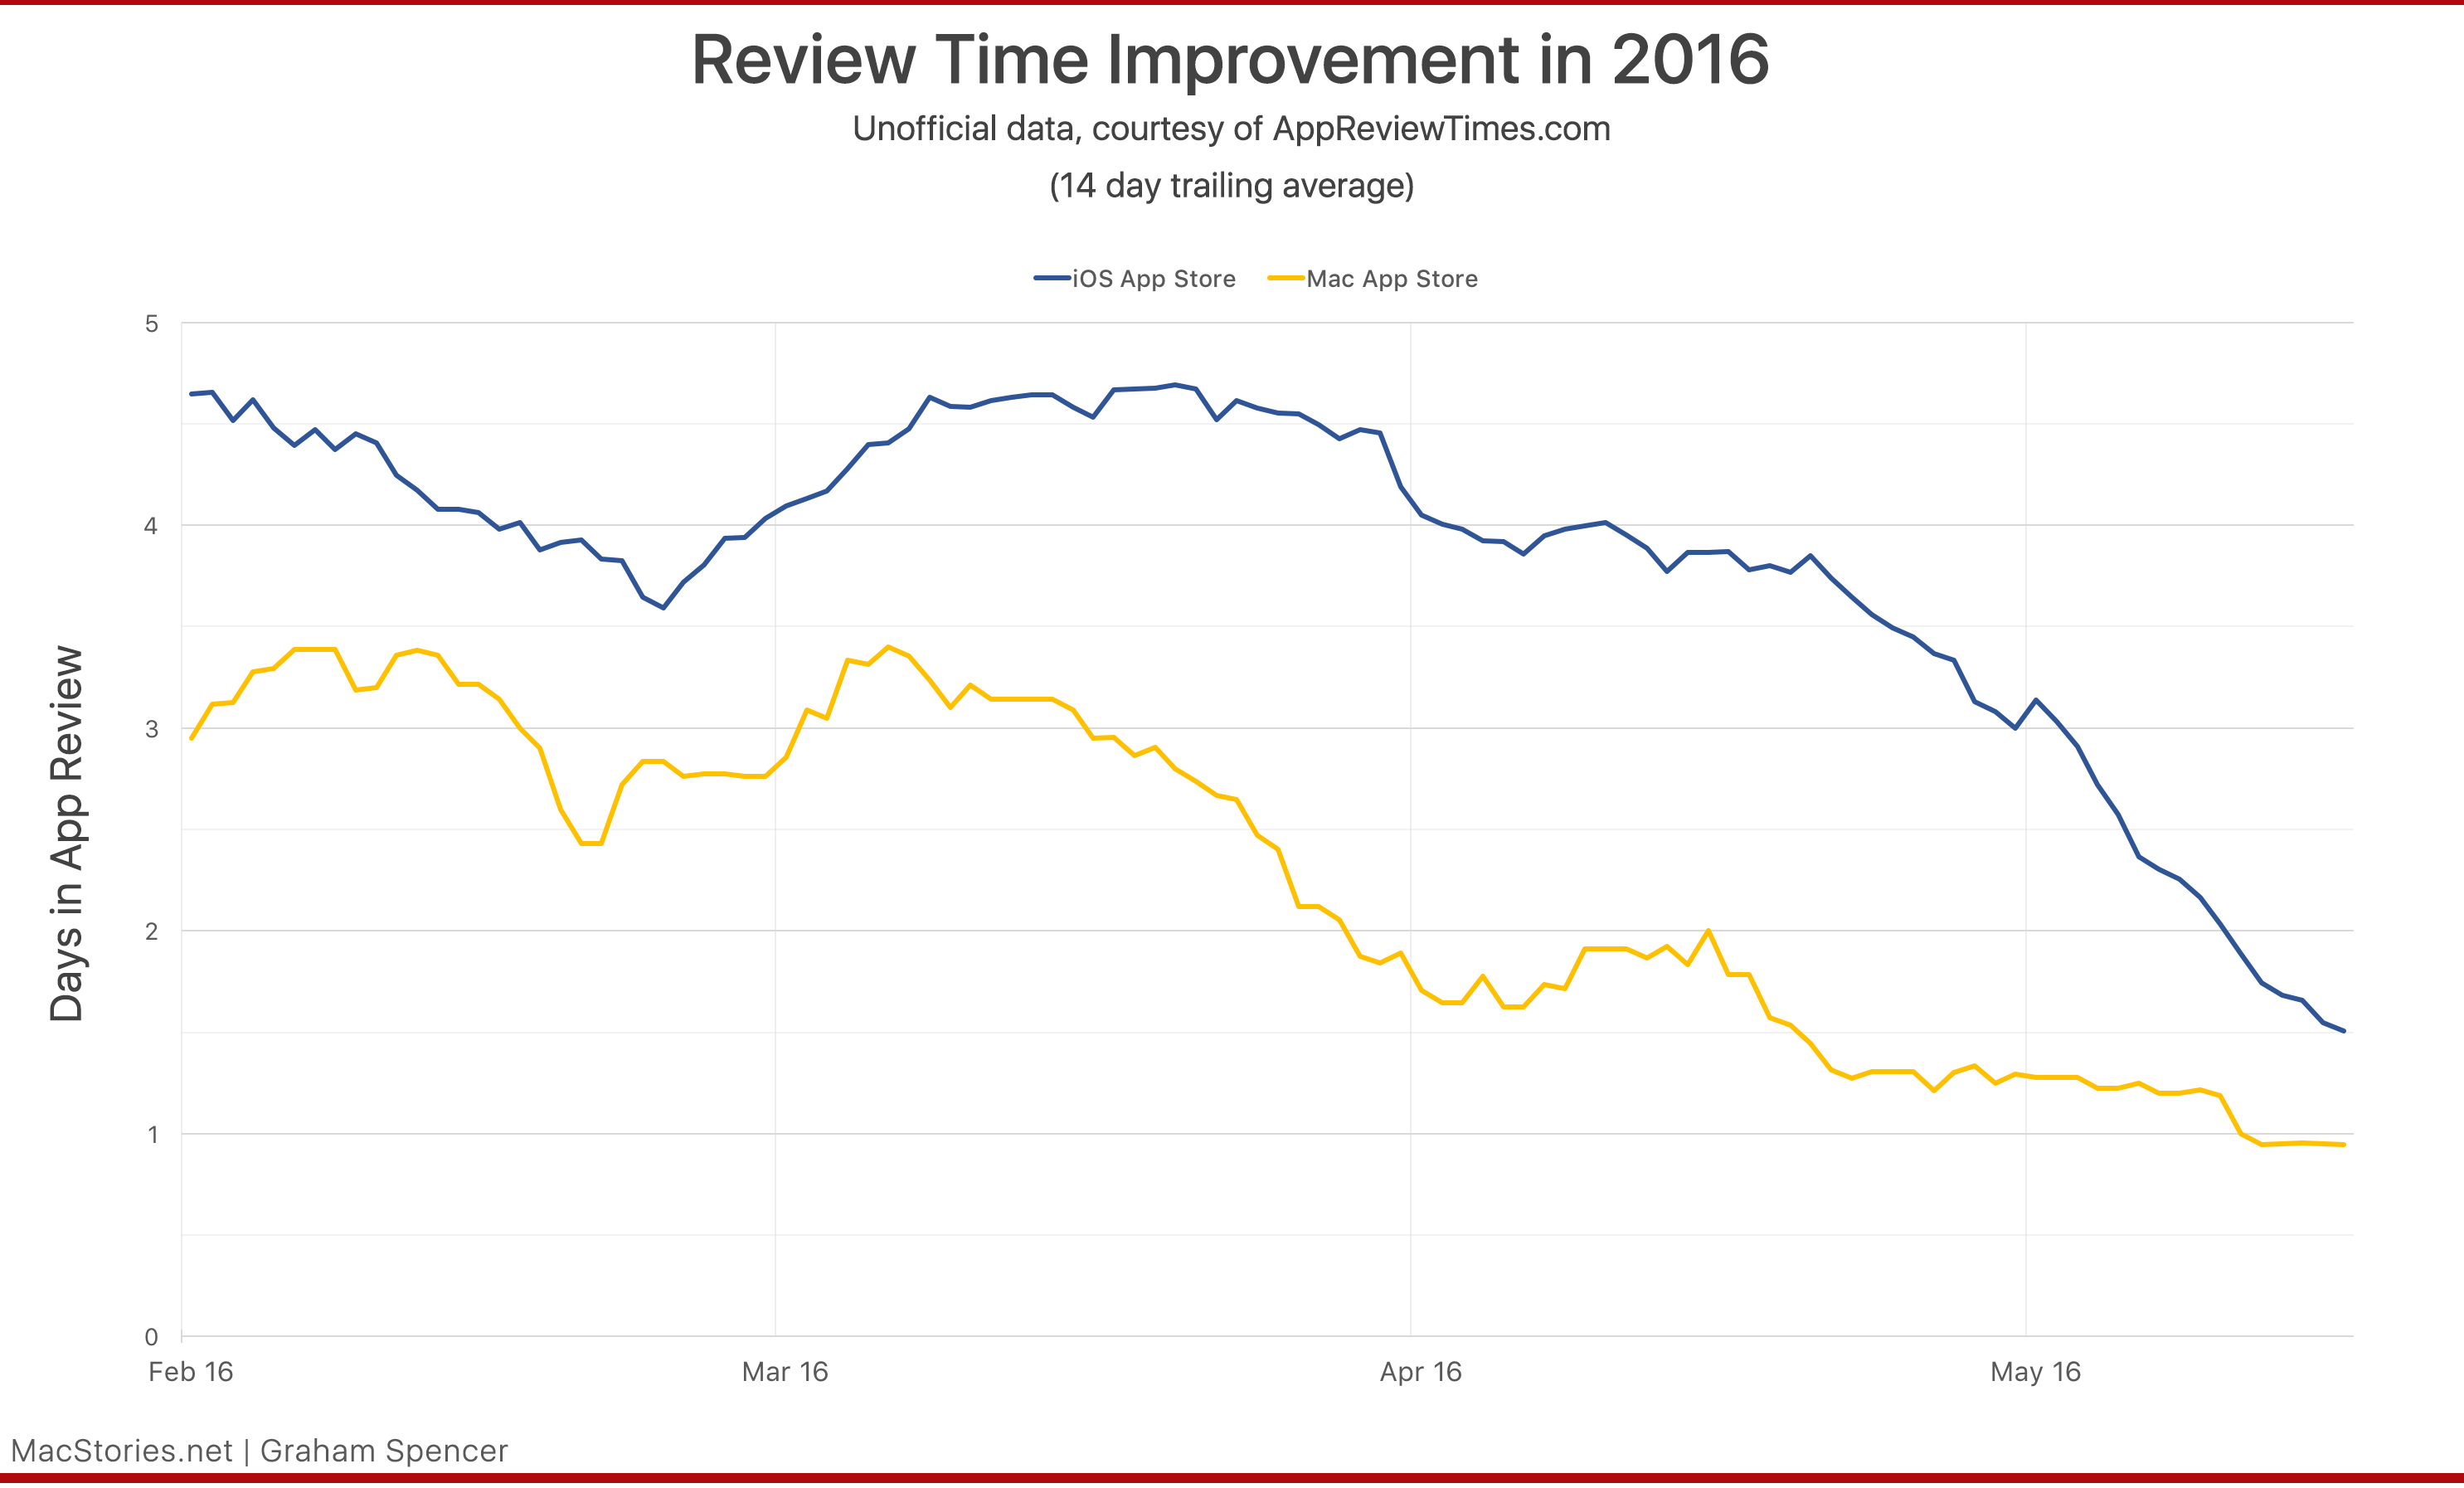 Data courtesy of AppReviewTimes.com